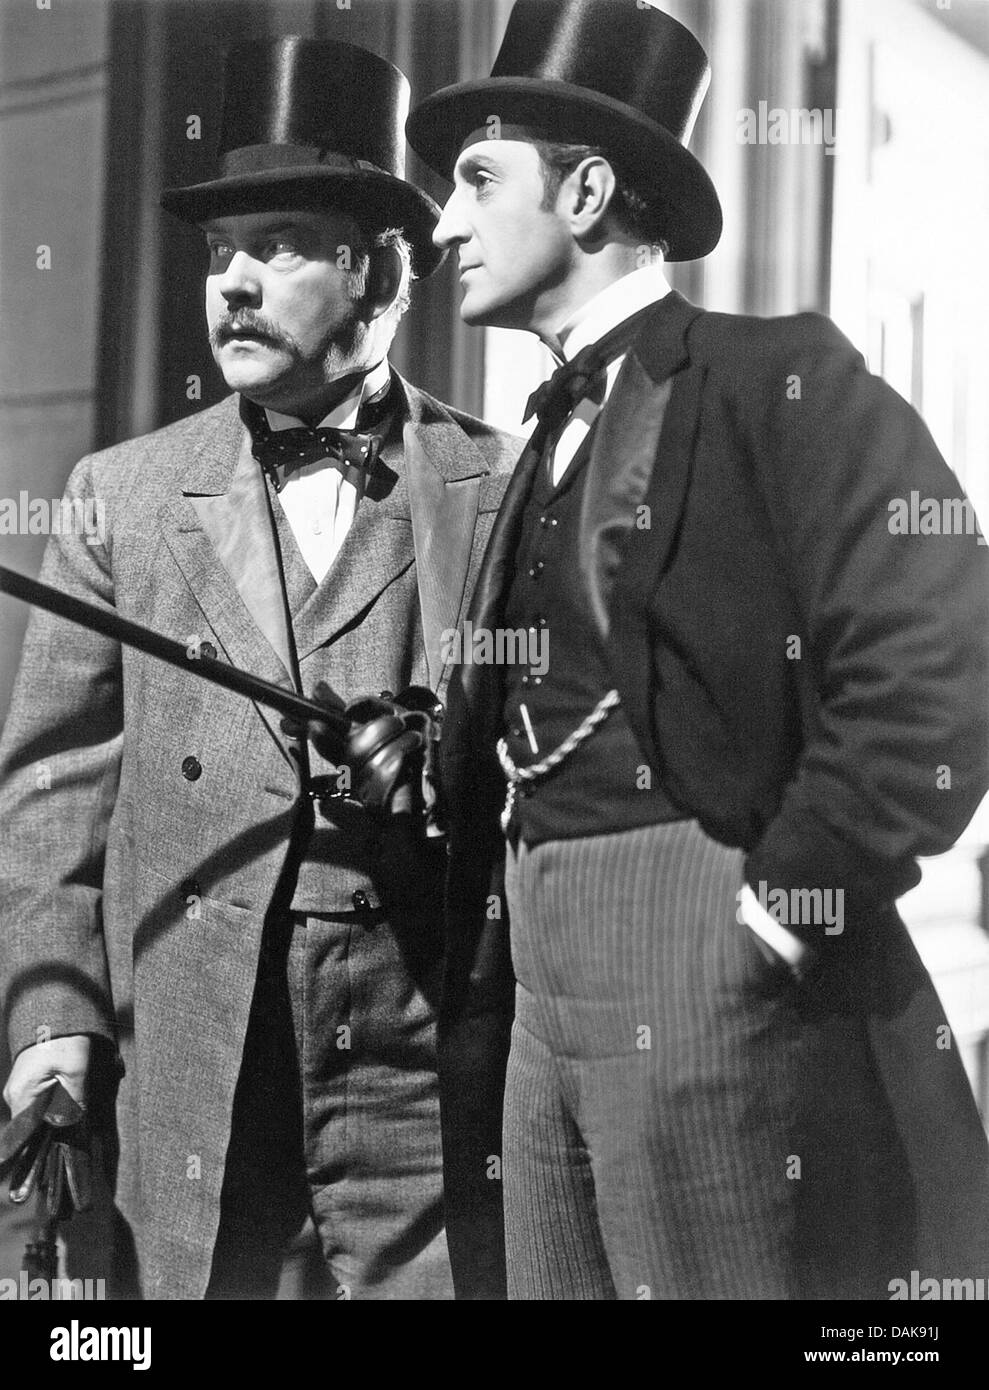 THE HOUND OF THE BASKERVILLES 1939 20th Century Fox film with Basil Rathbone (right) as Holmes and Nigel Bruce as Dr. Watson Stock Photo